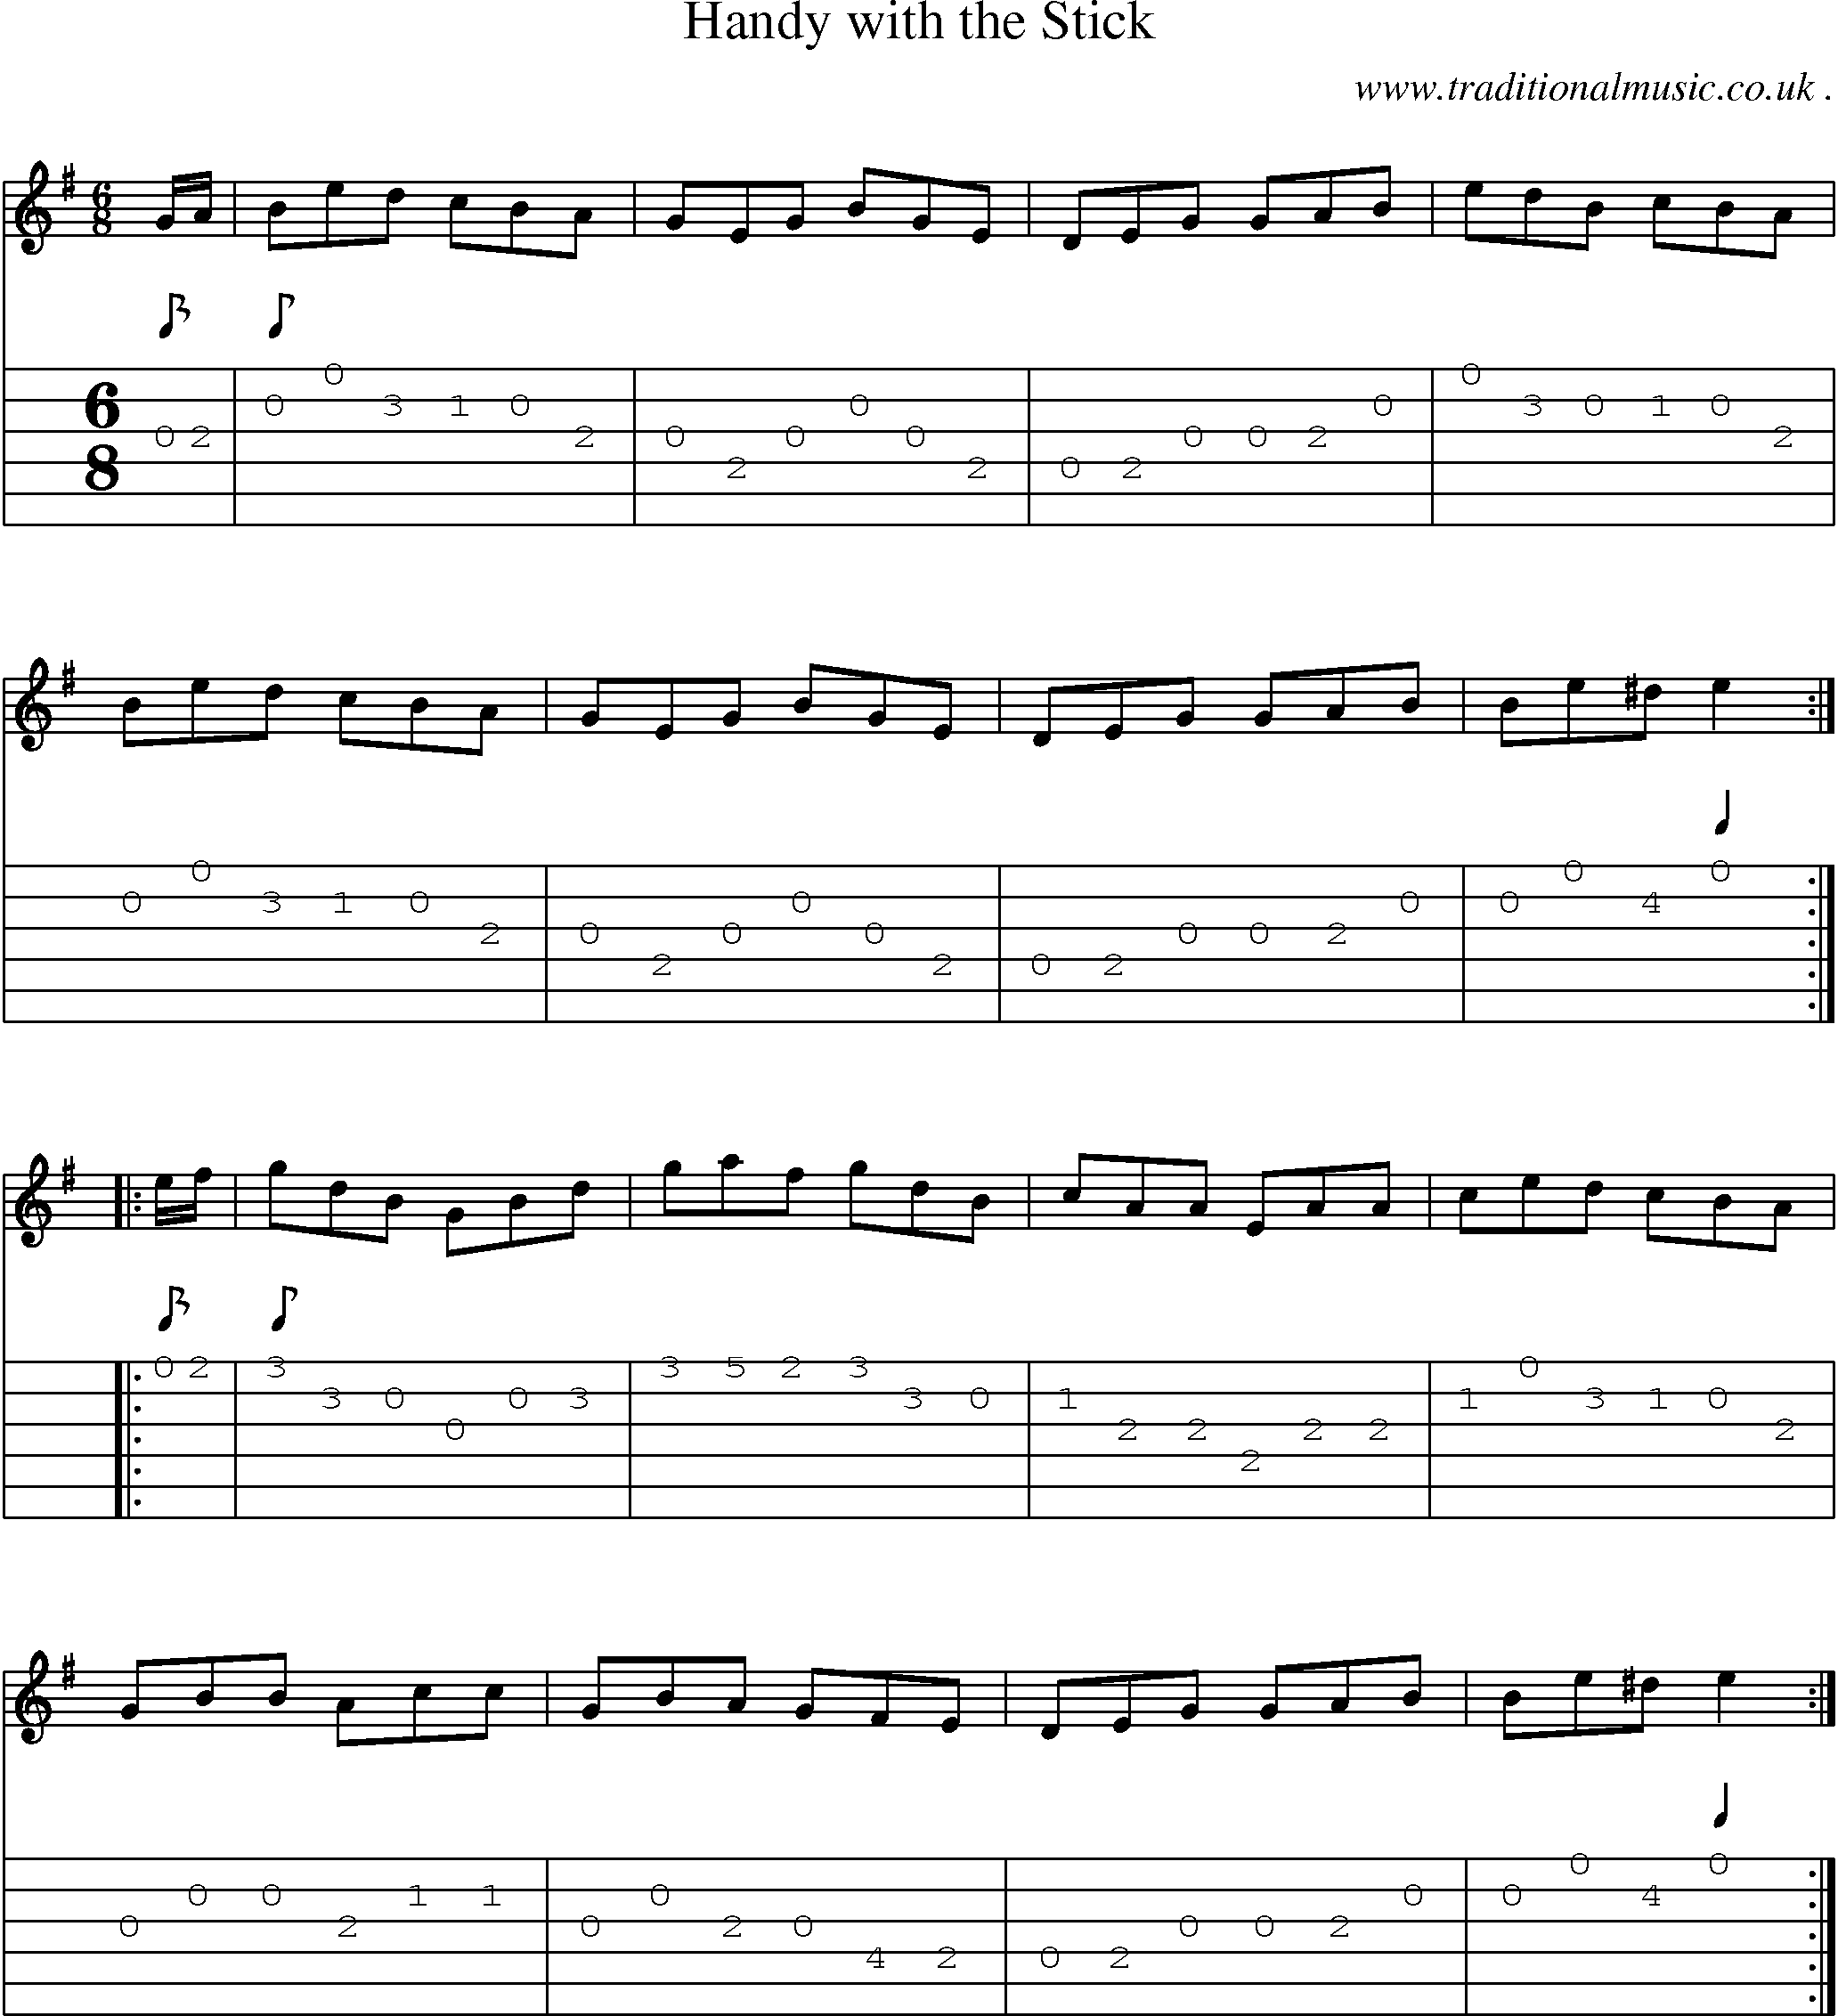 Sheet-Music and Guitar Tabs for Handy With The Stick